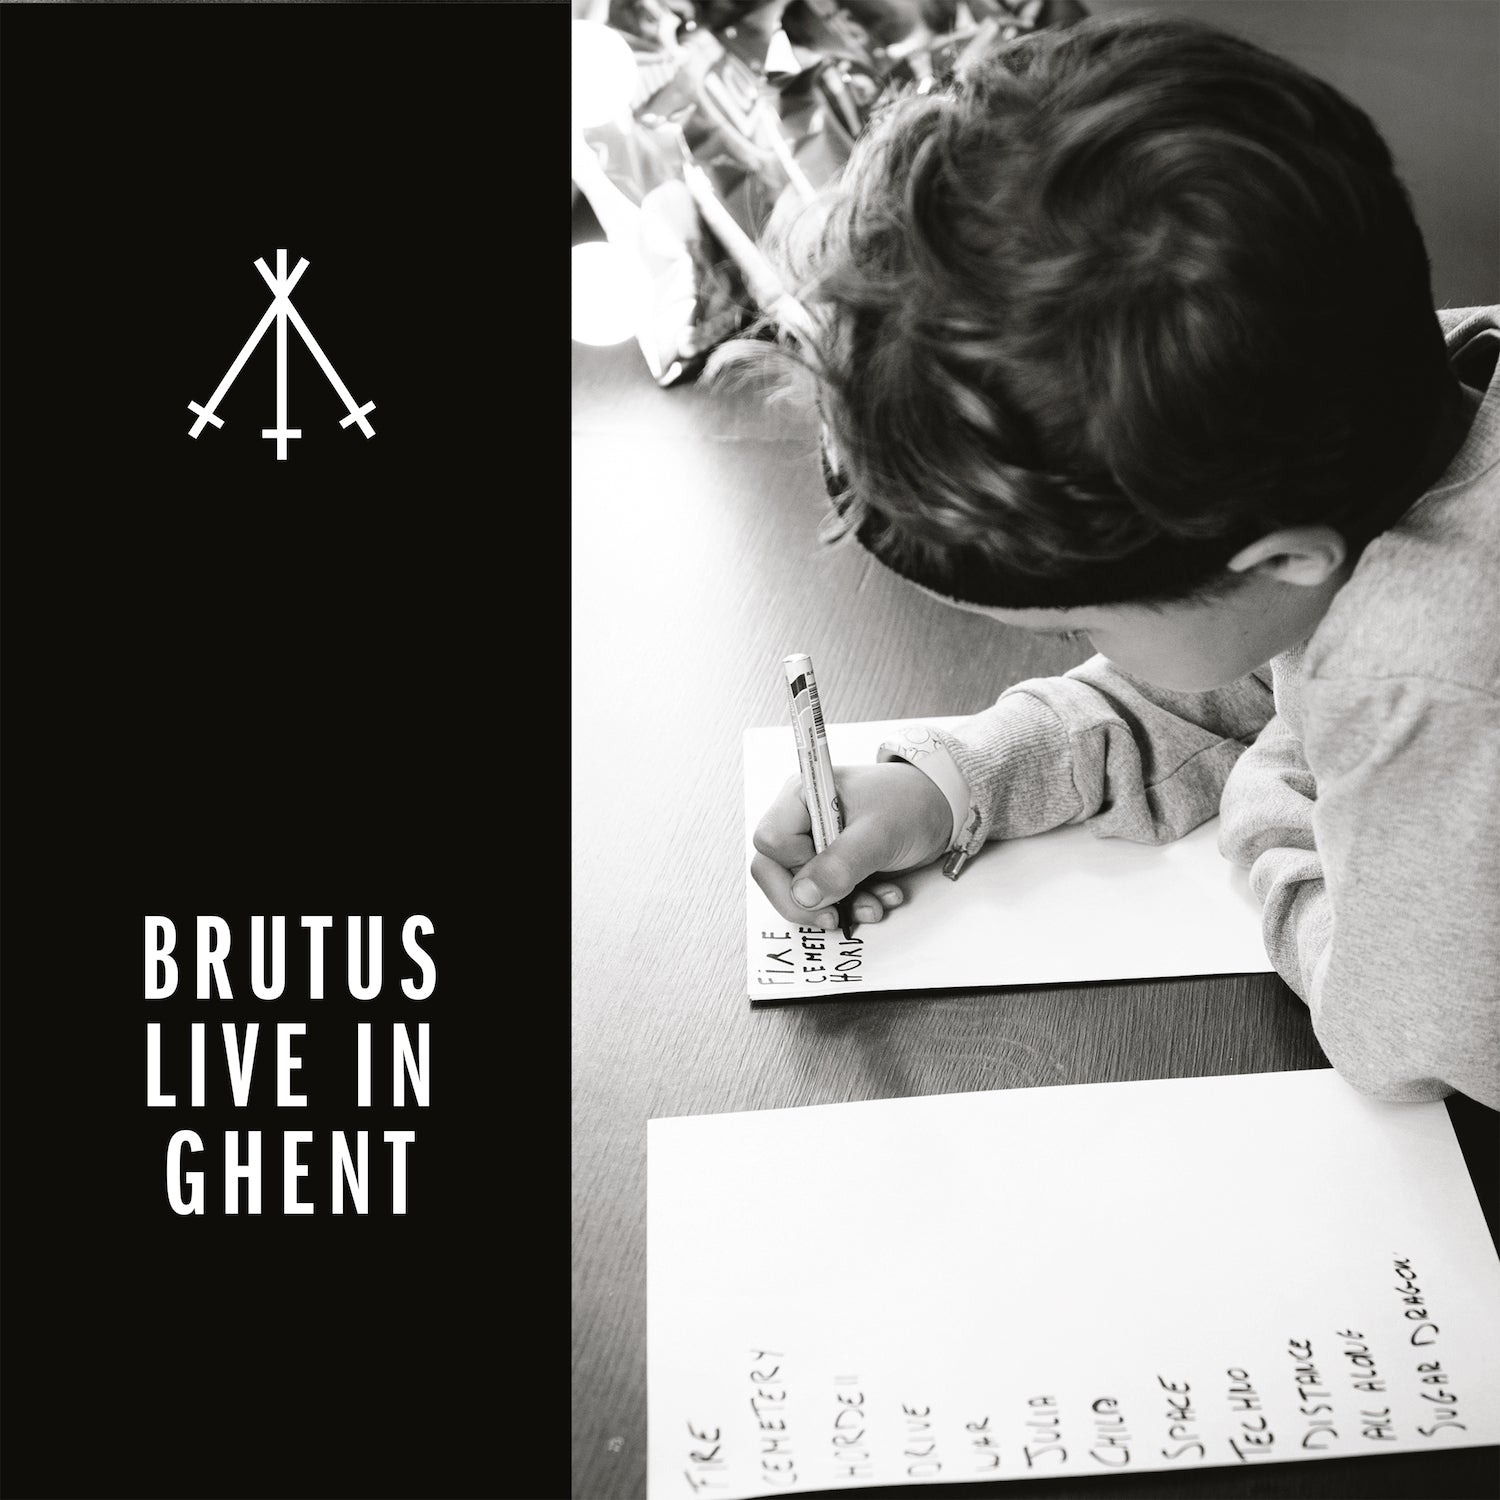 BRUTUS "Live In Ghent" CD